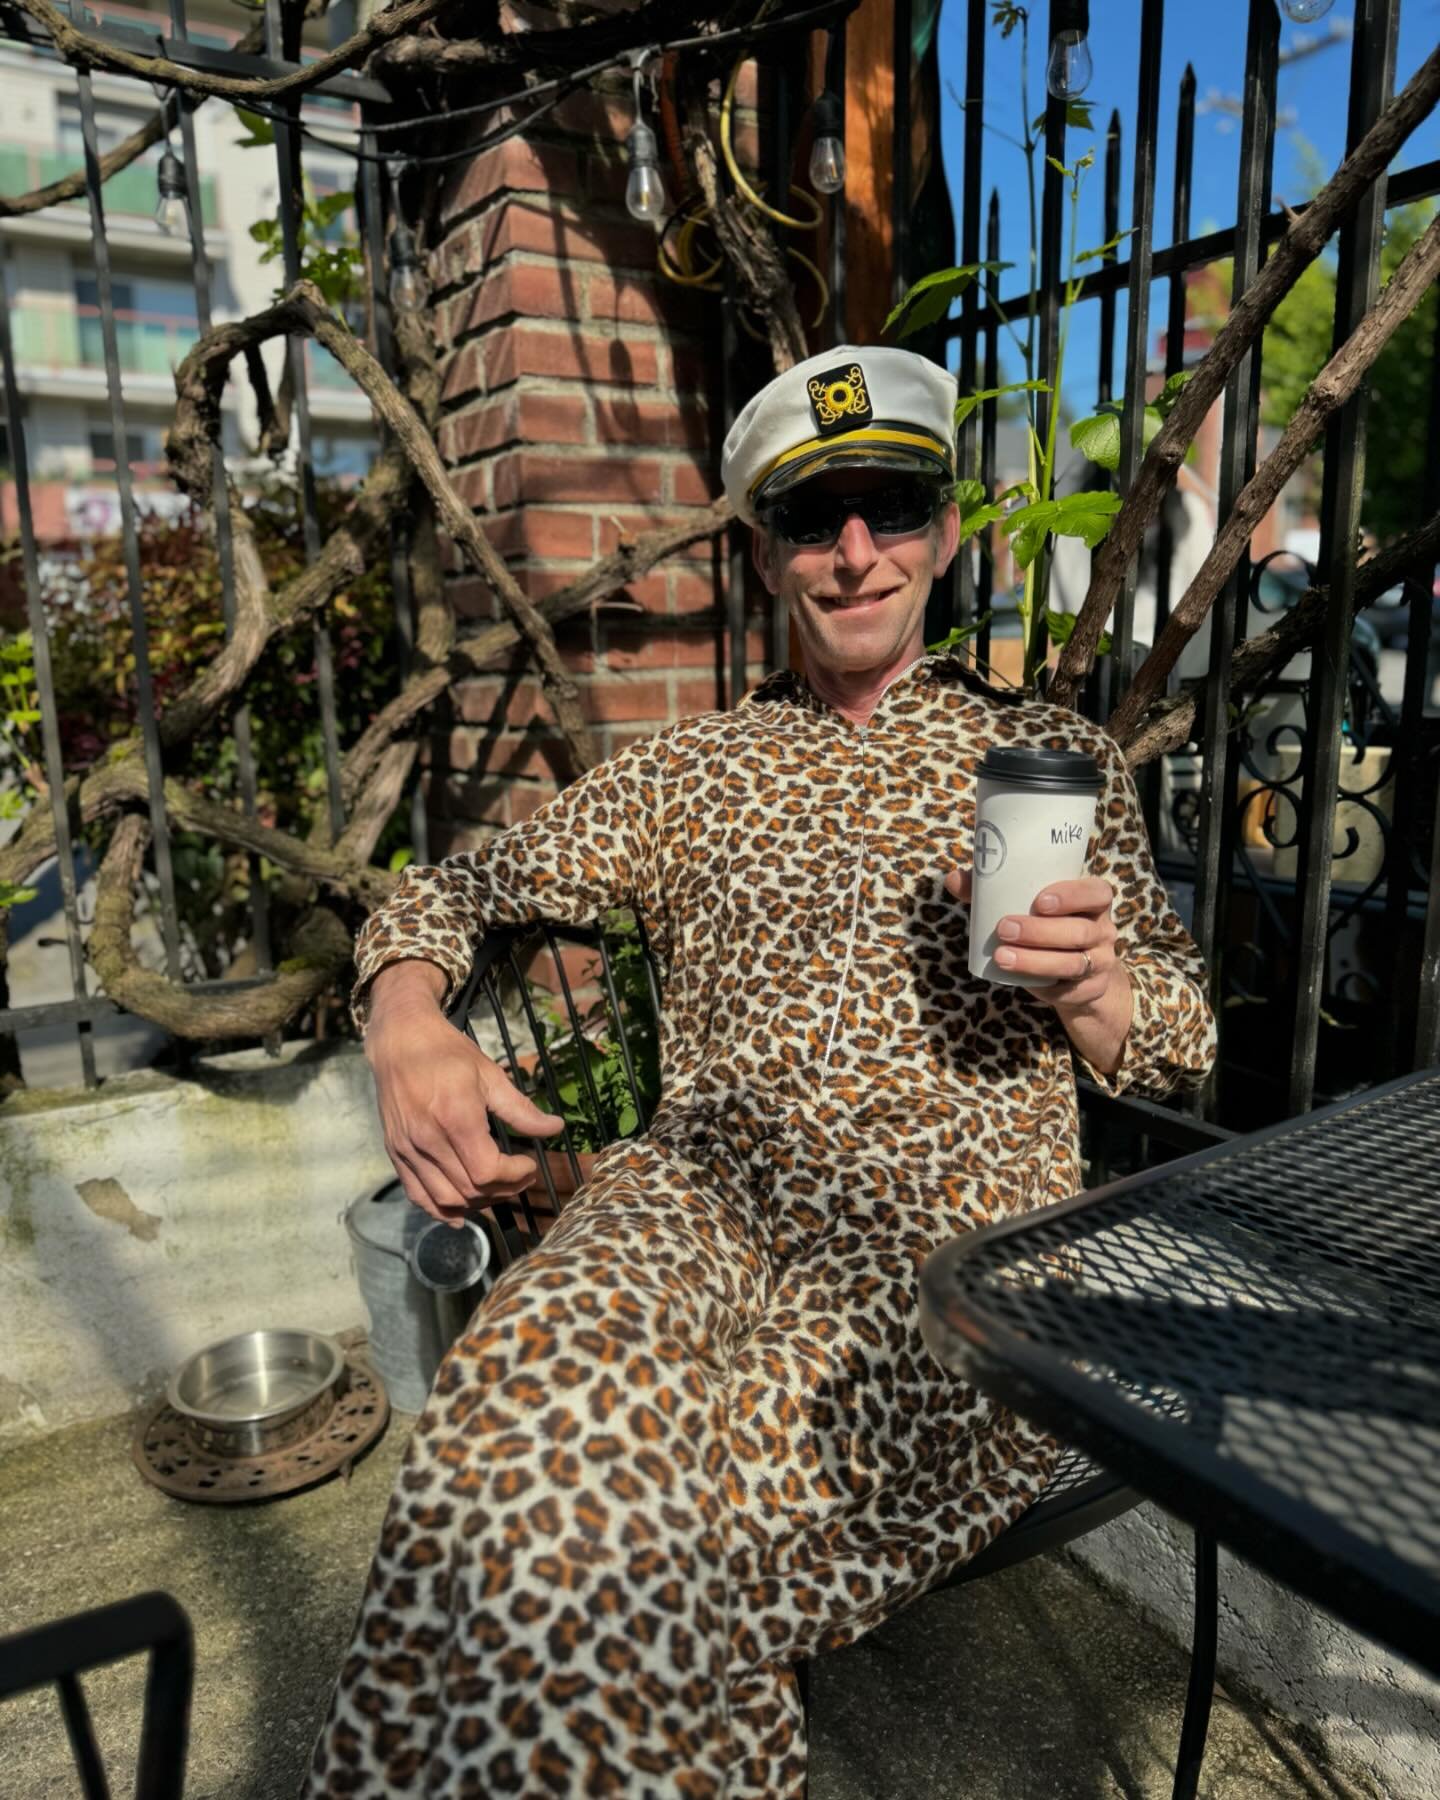 Meet Mike! Longtime Hotwire customer and consistently best dressed local! 😍 Be like Mike and drink Hotwire coffee!

P.S. Did you know that our Summer Sun Specials are now live and ready to order? Celebrate the sunny season with our scrumptious summe